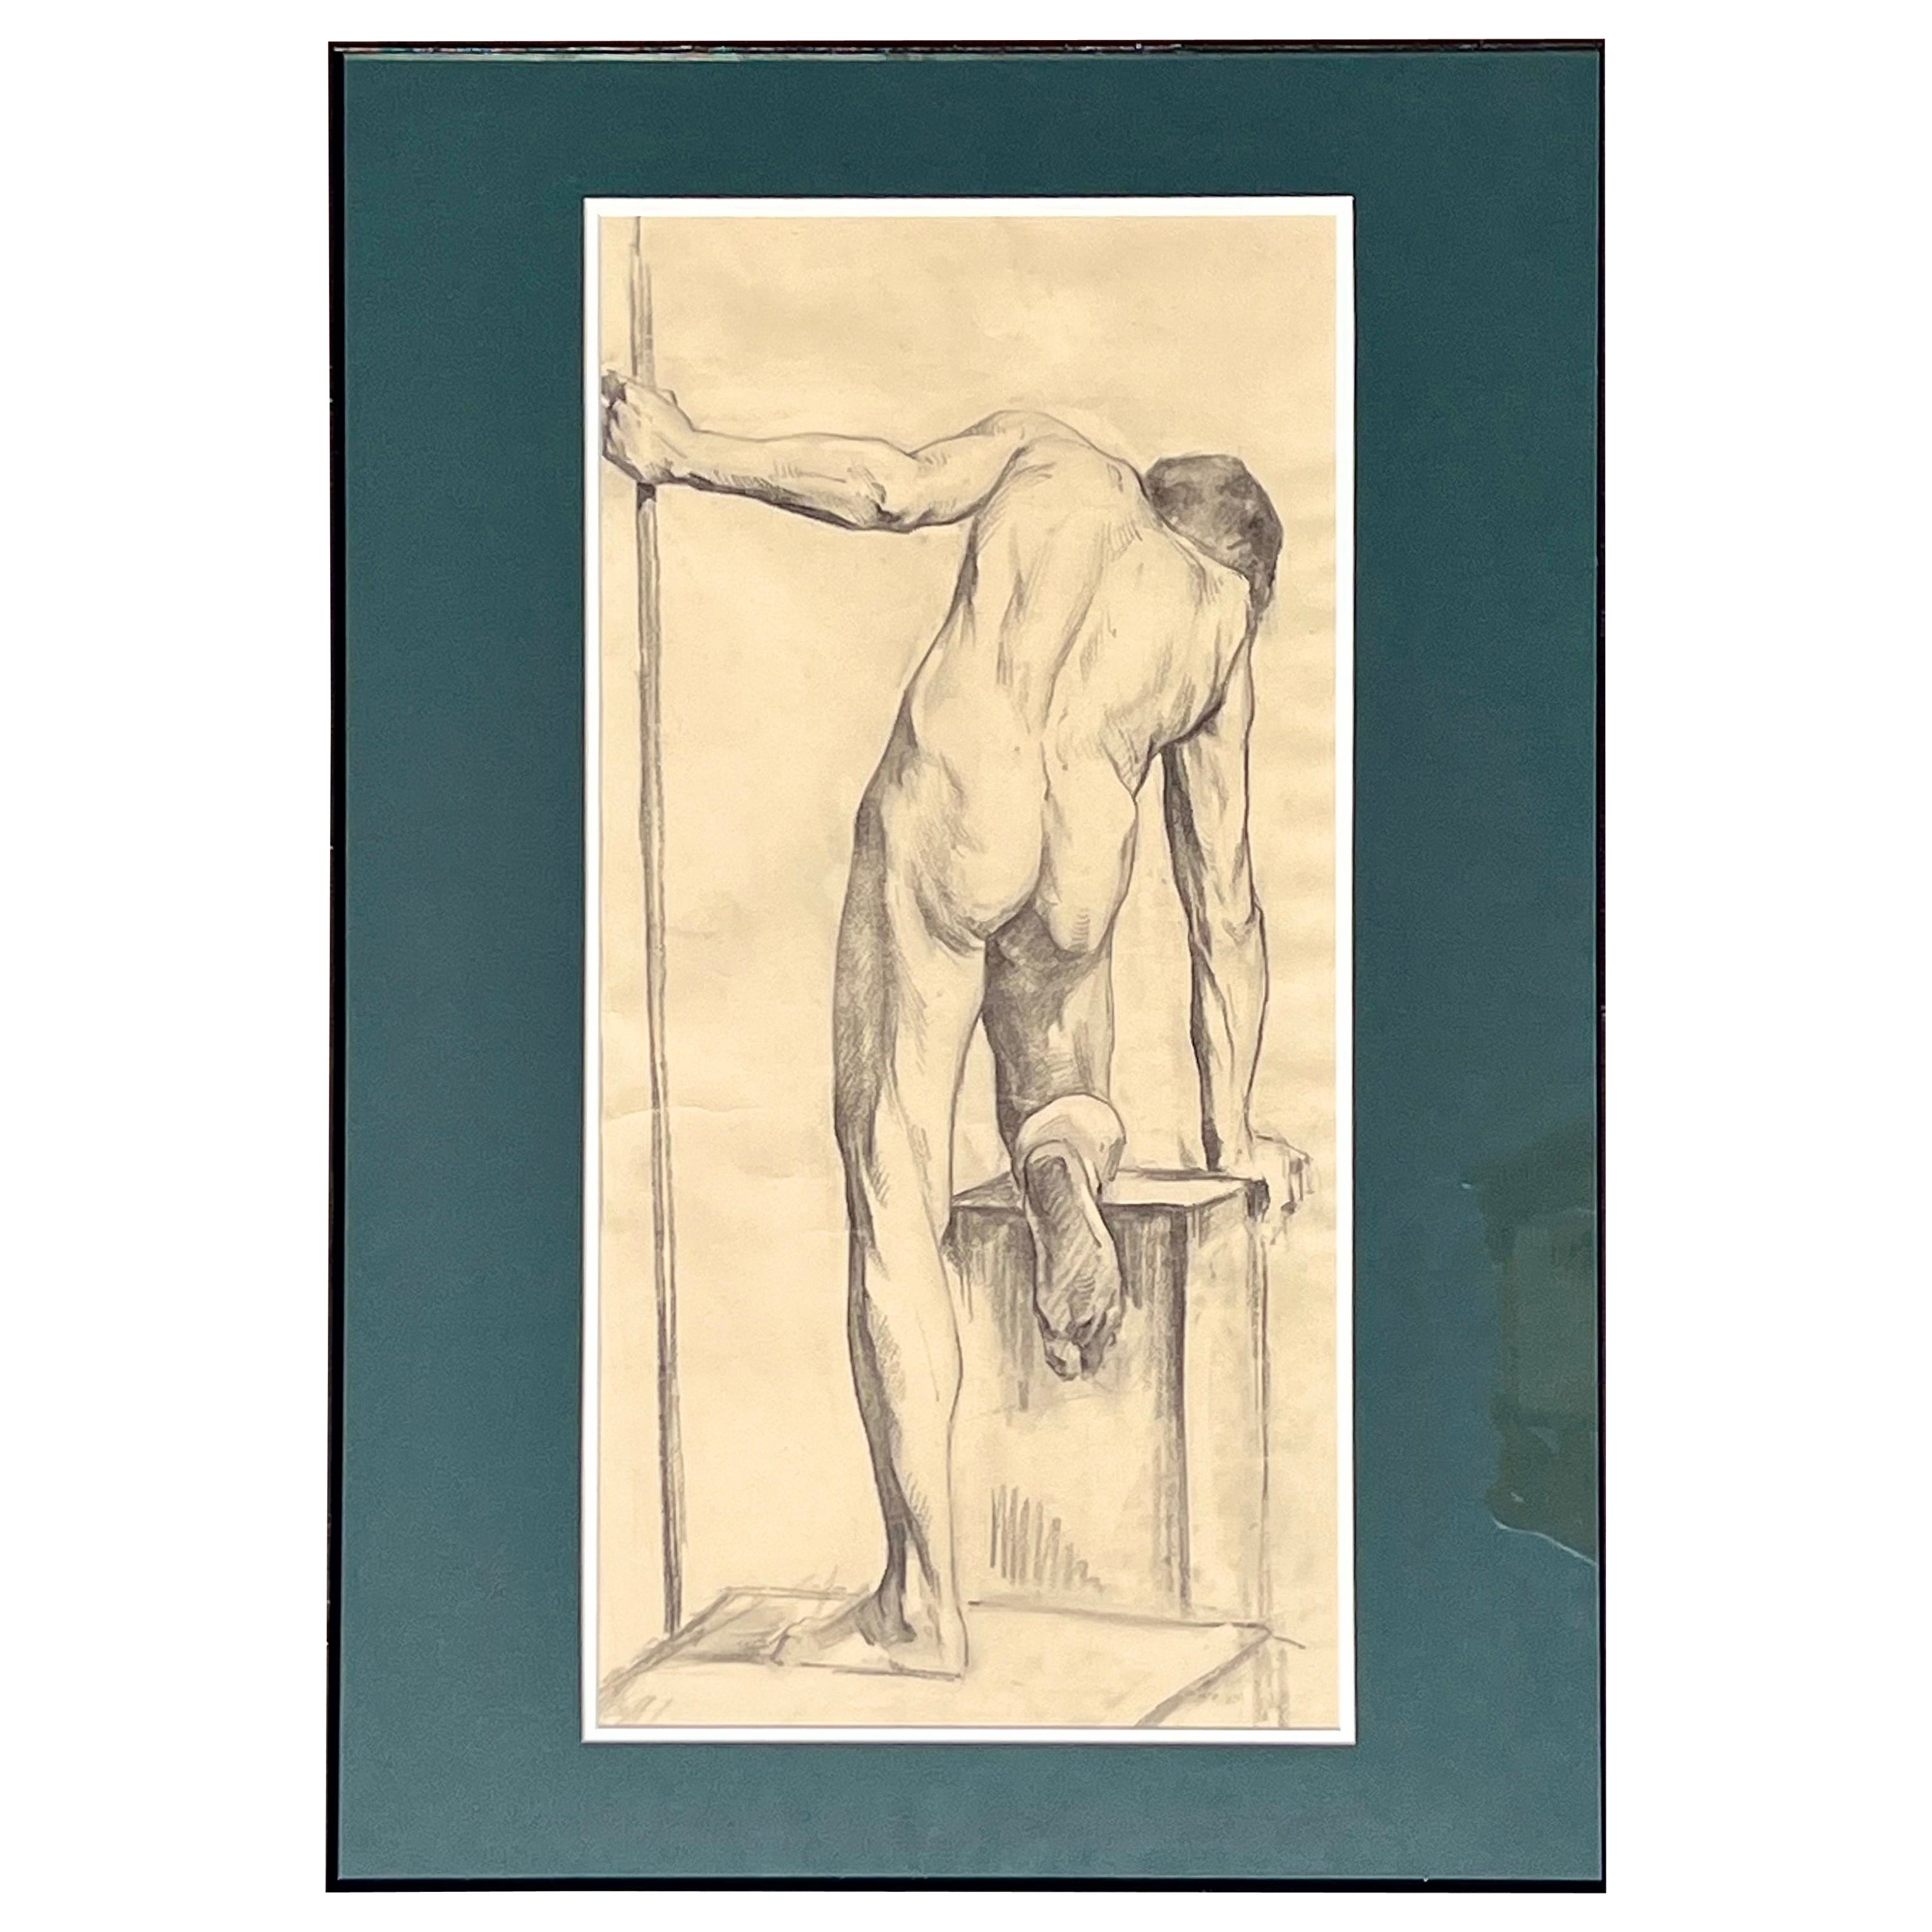 Antique Male Nude Art Study Drawing From Paris, Framed in Italy

Offered for sale is a late 19th-century male nude art study drawing in graphite on paper with great details There are 4 drawings in total which are listed individually. They were